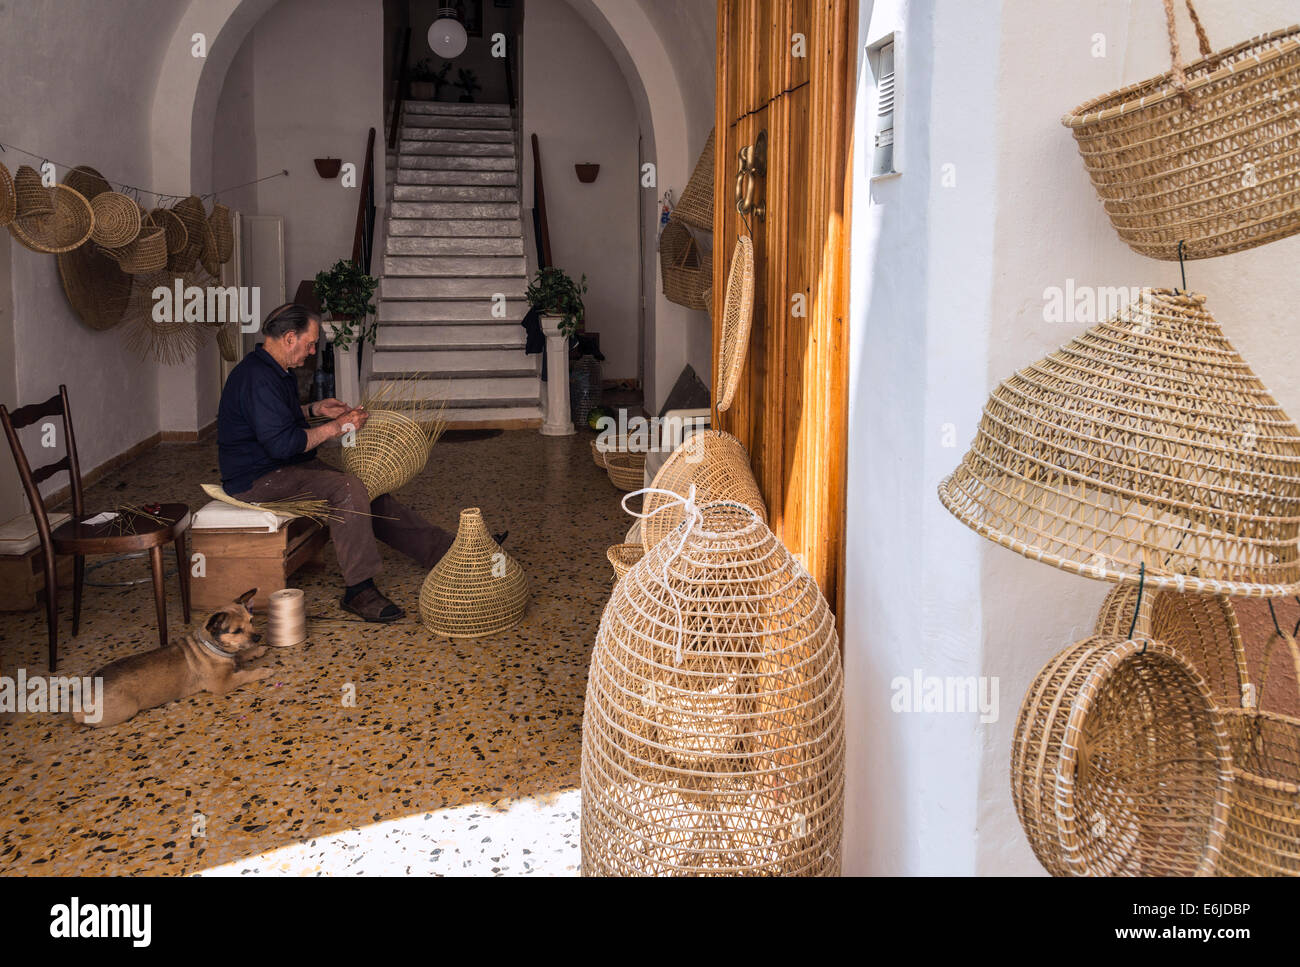 Fishing traps known as 'Nasse' and baskets being made in Gallipoli old town, Puglia, Italy. Stock Photo